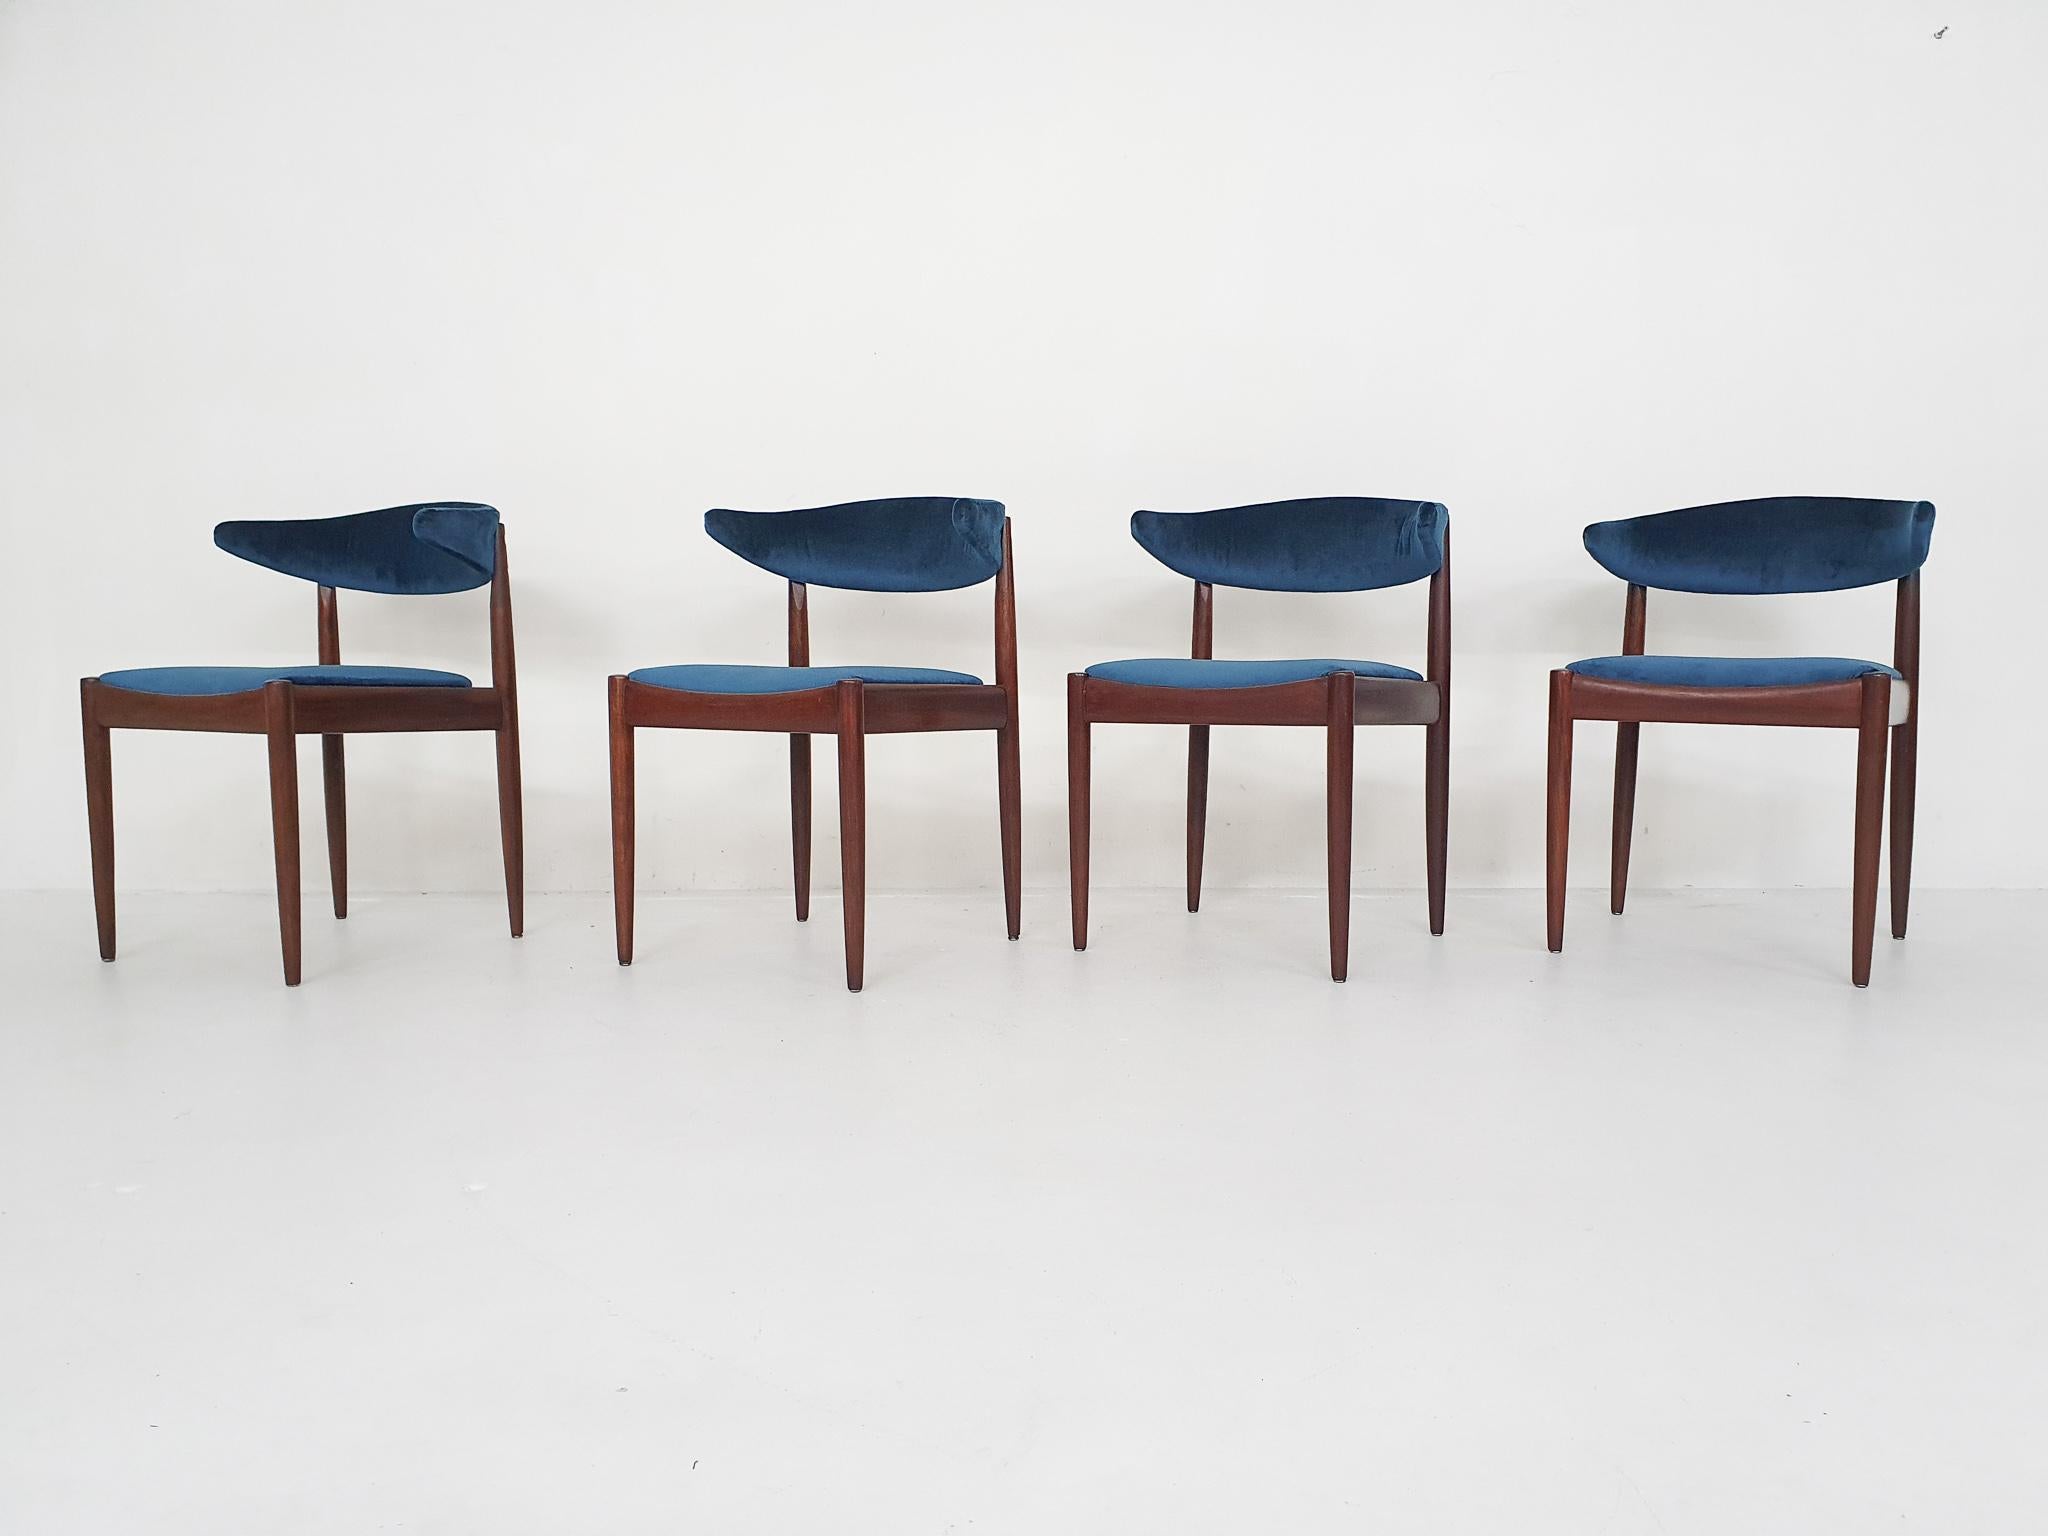 Mid-20th Century Set of Four Rosewood and Velvet Dining Chairs by Topform, the Netherlands 1950's For Sale